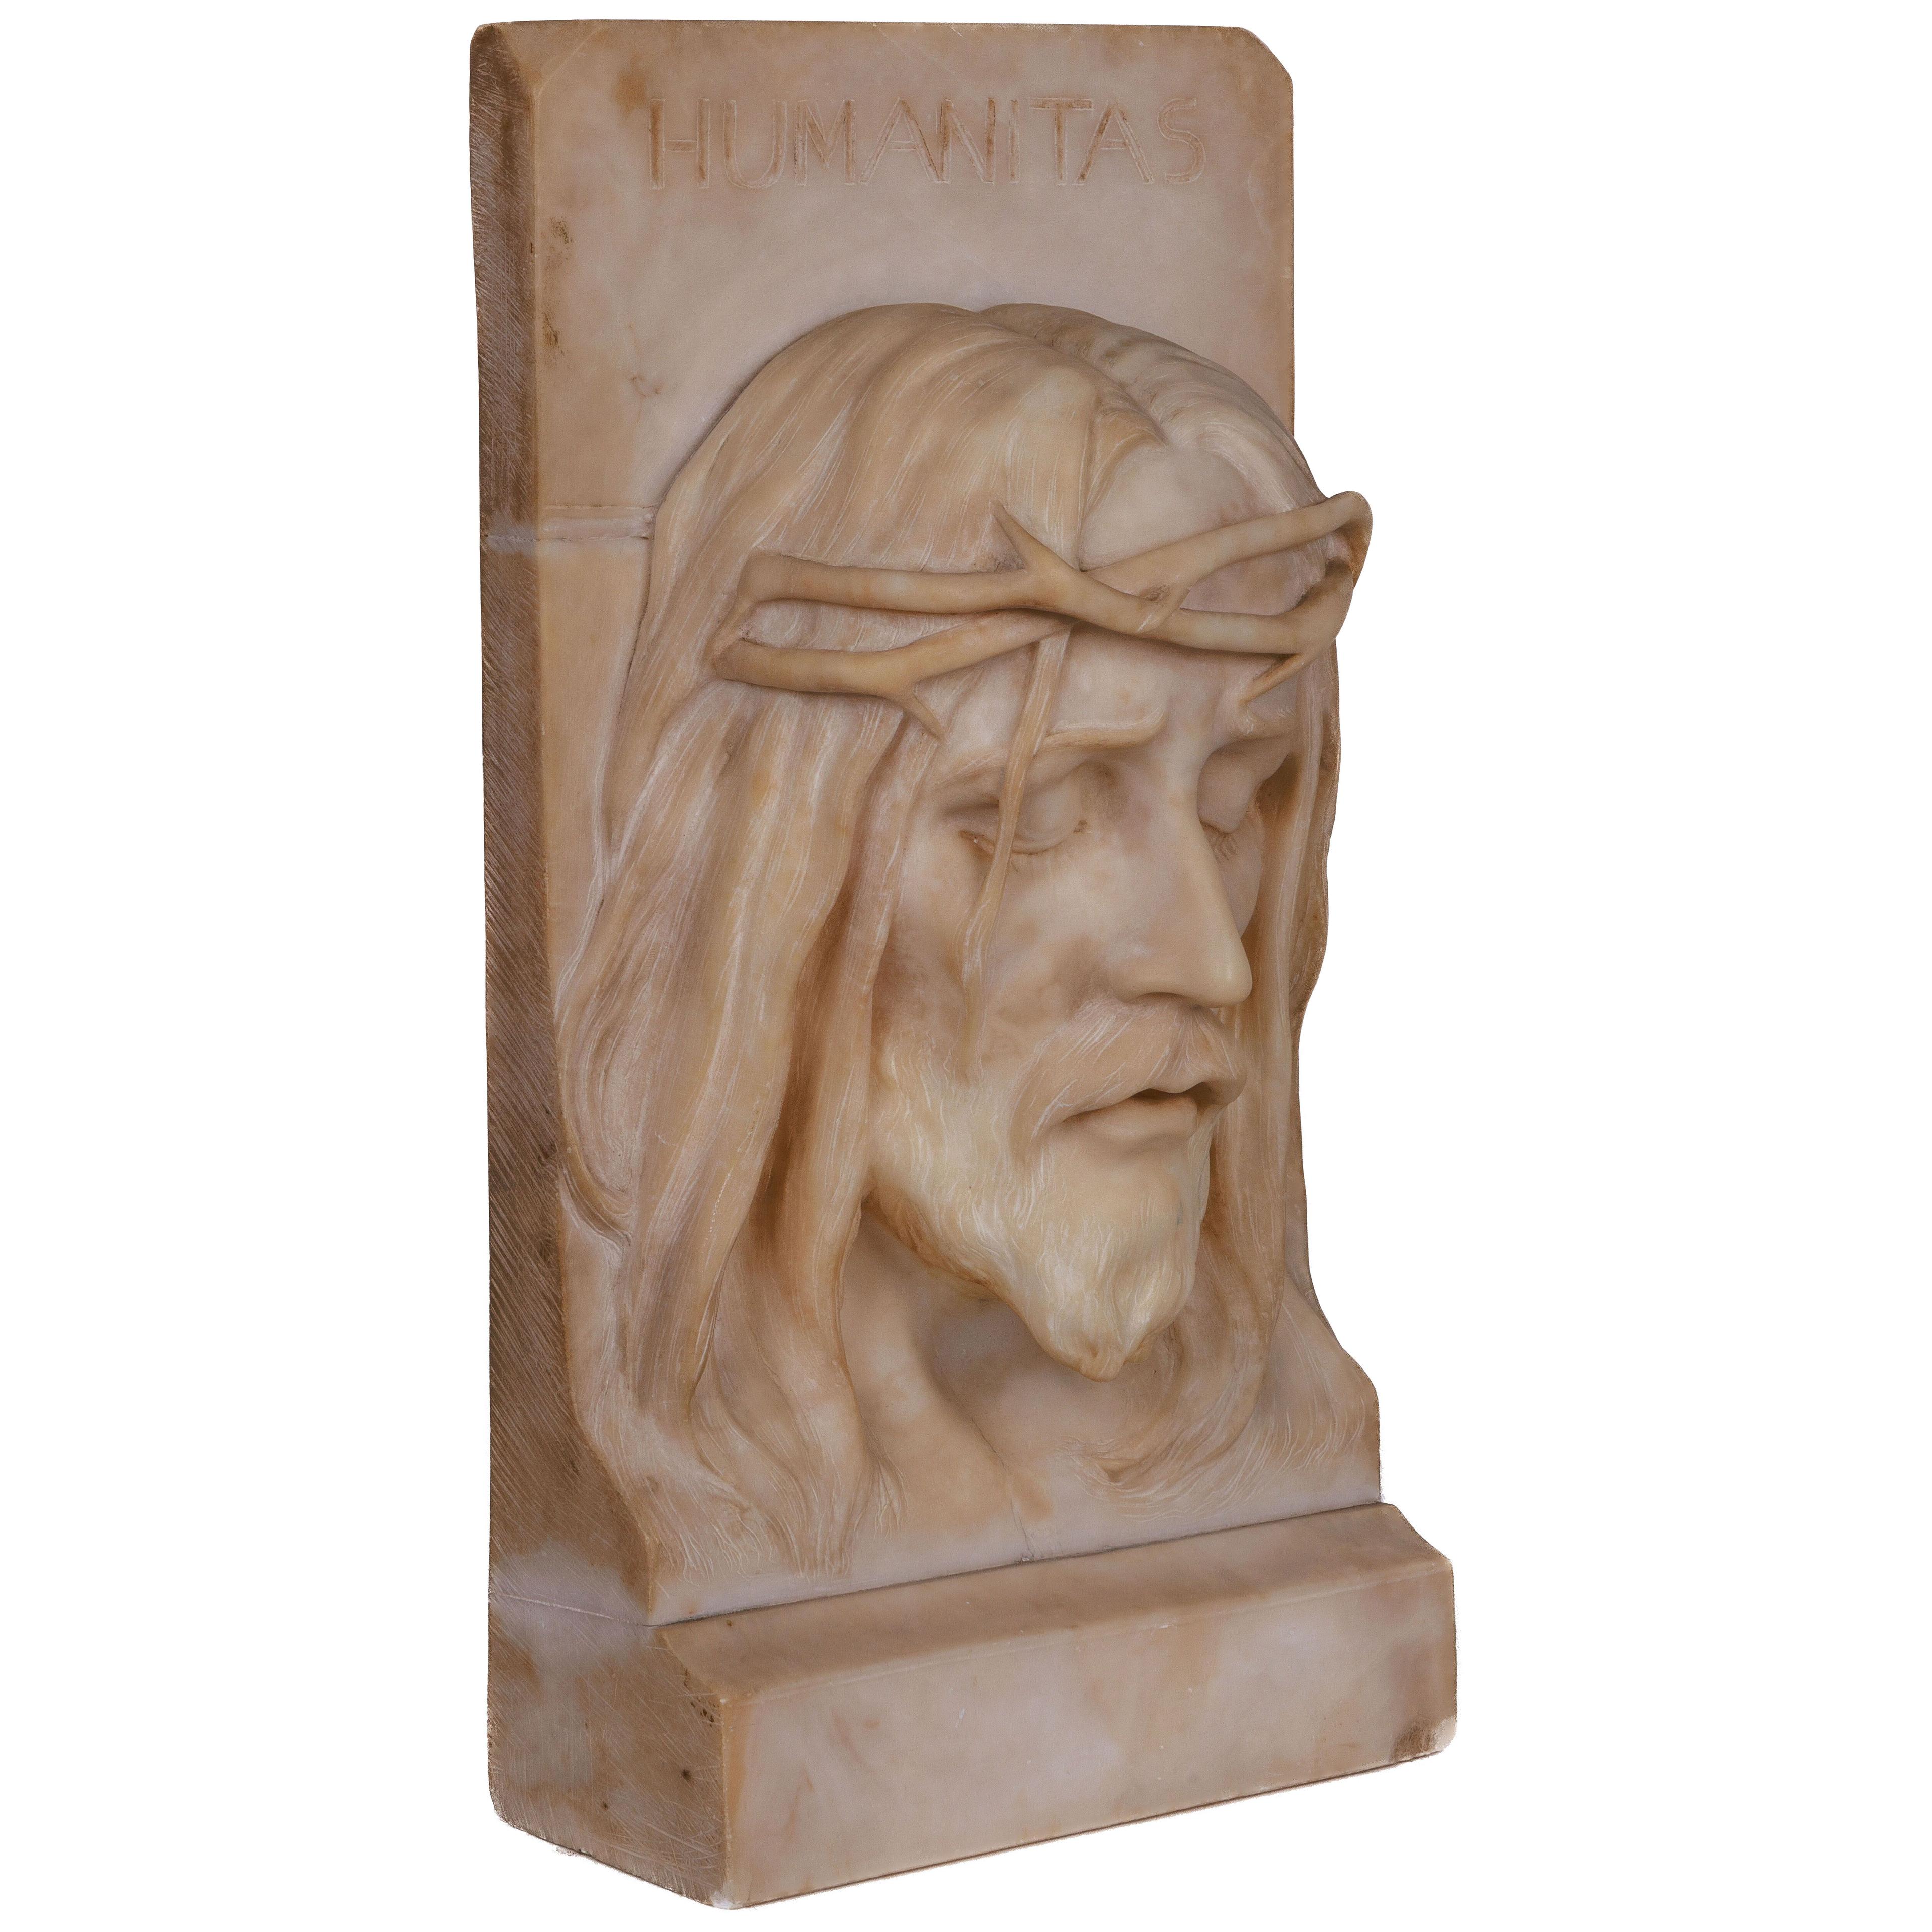 Rare and Important Italian Alabaster Bust Sculpture of Jesus Christ, C. 1860